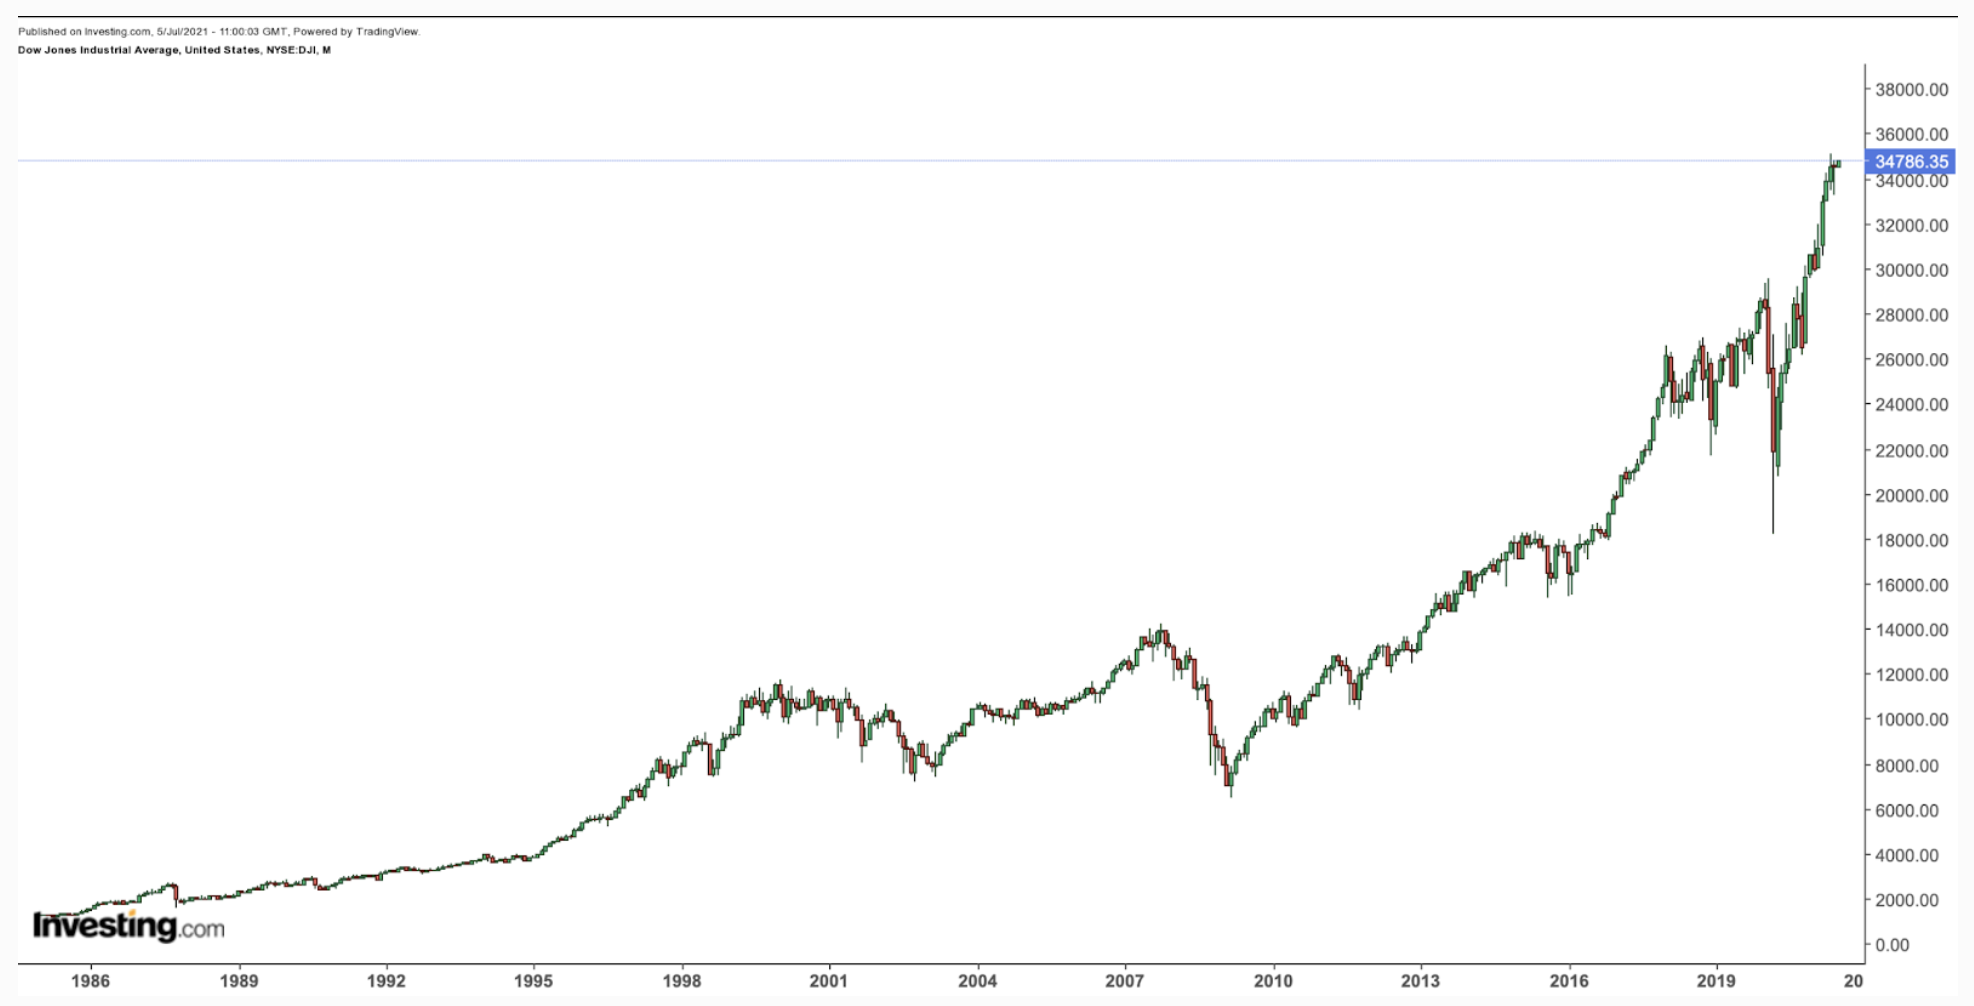 DJIA (monthly)